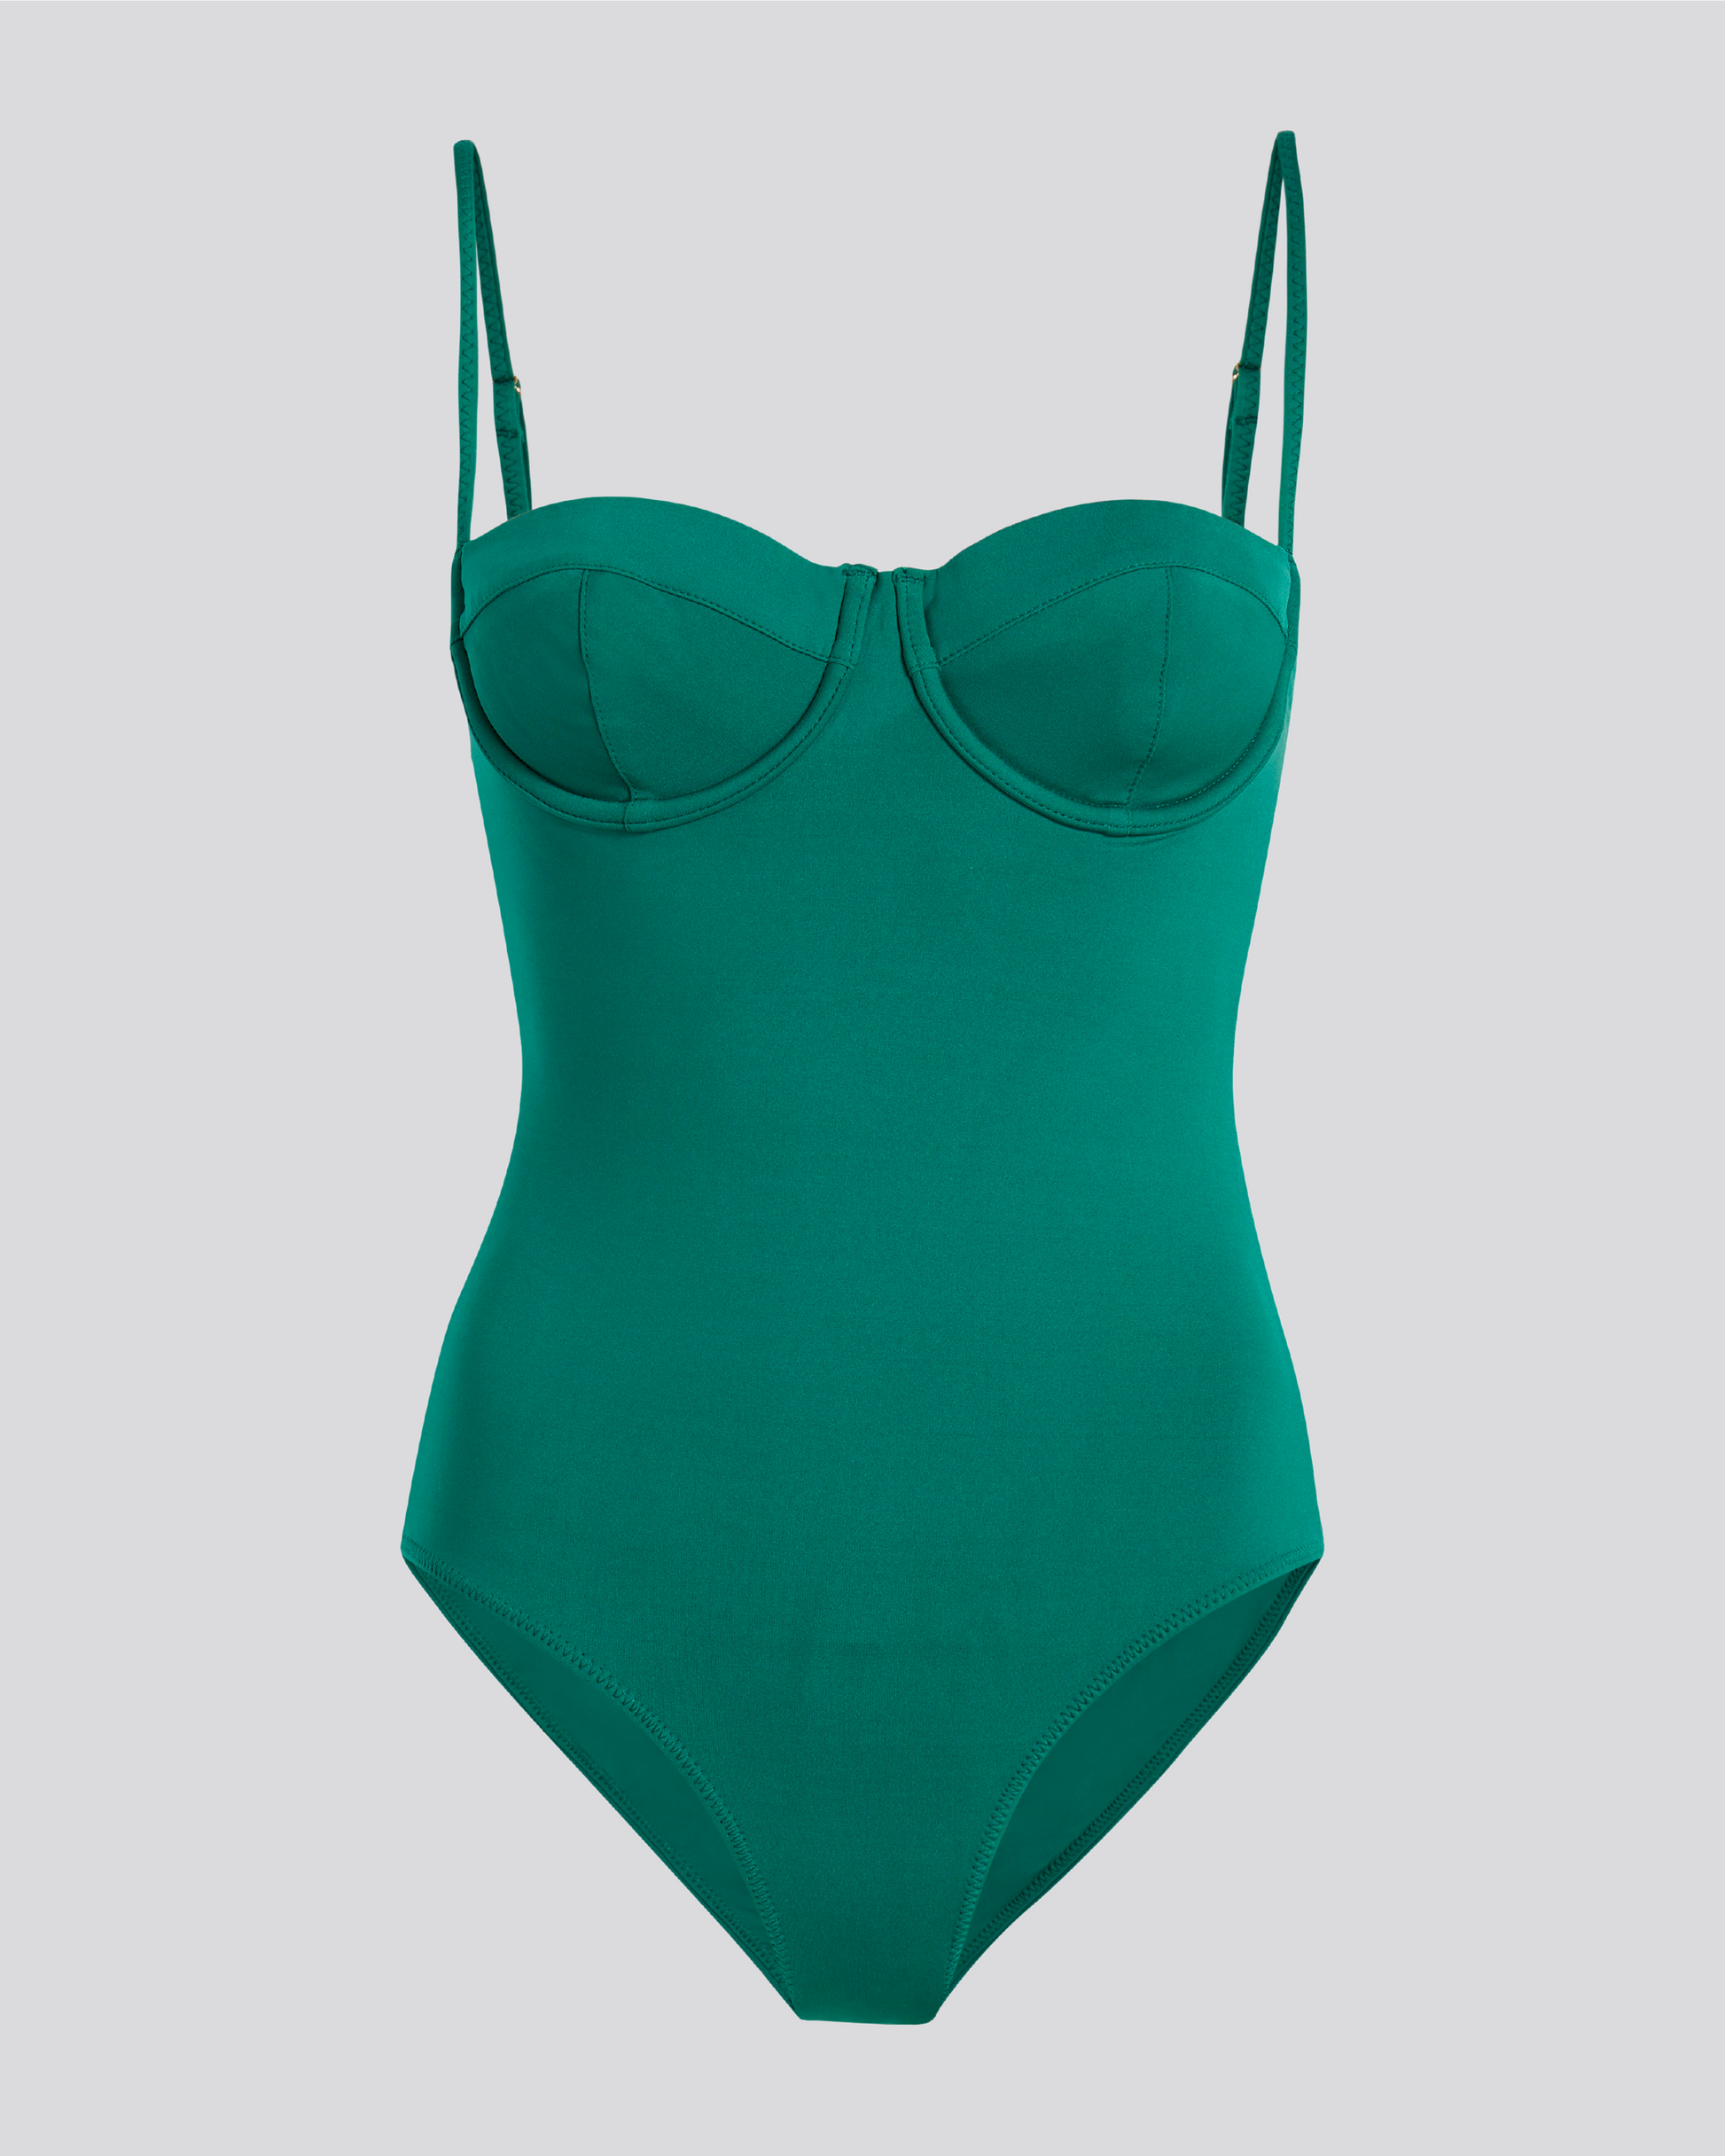 The Gianna One Piece - Solid & Striped